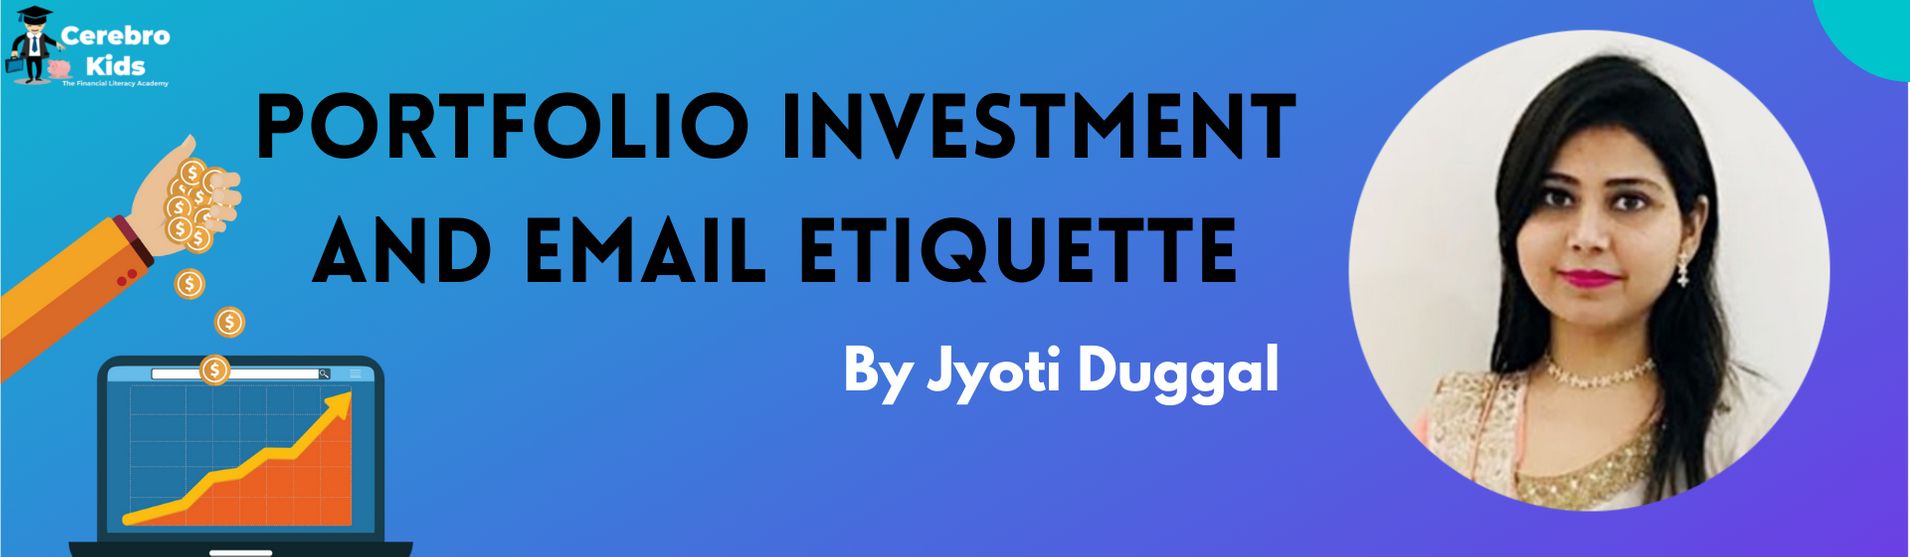 Participate in the Webinar on "Portfolio Investment and Email Etiquette" by Ms. Jyoti Duggal  before 14 Aug 21, 11:30 AM CUT